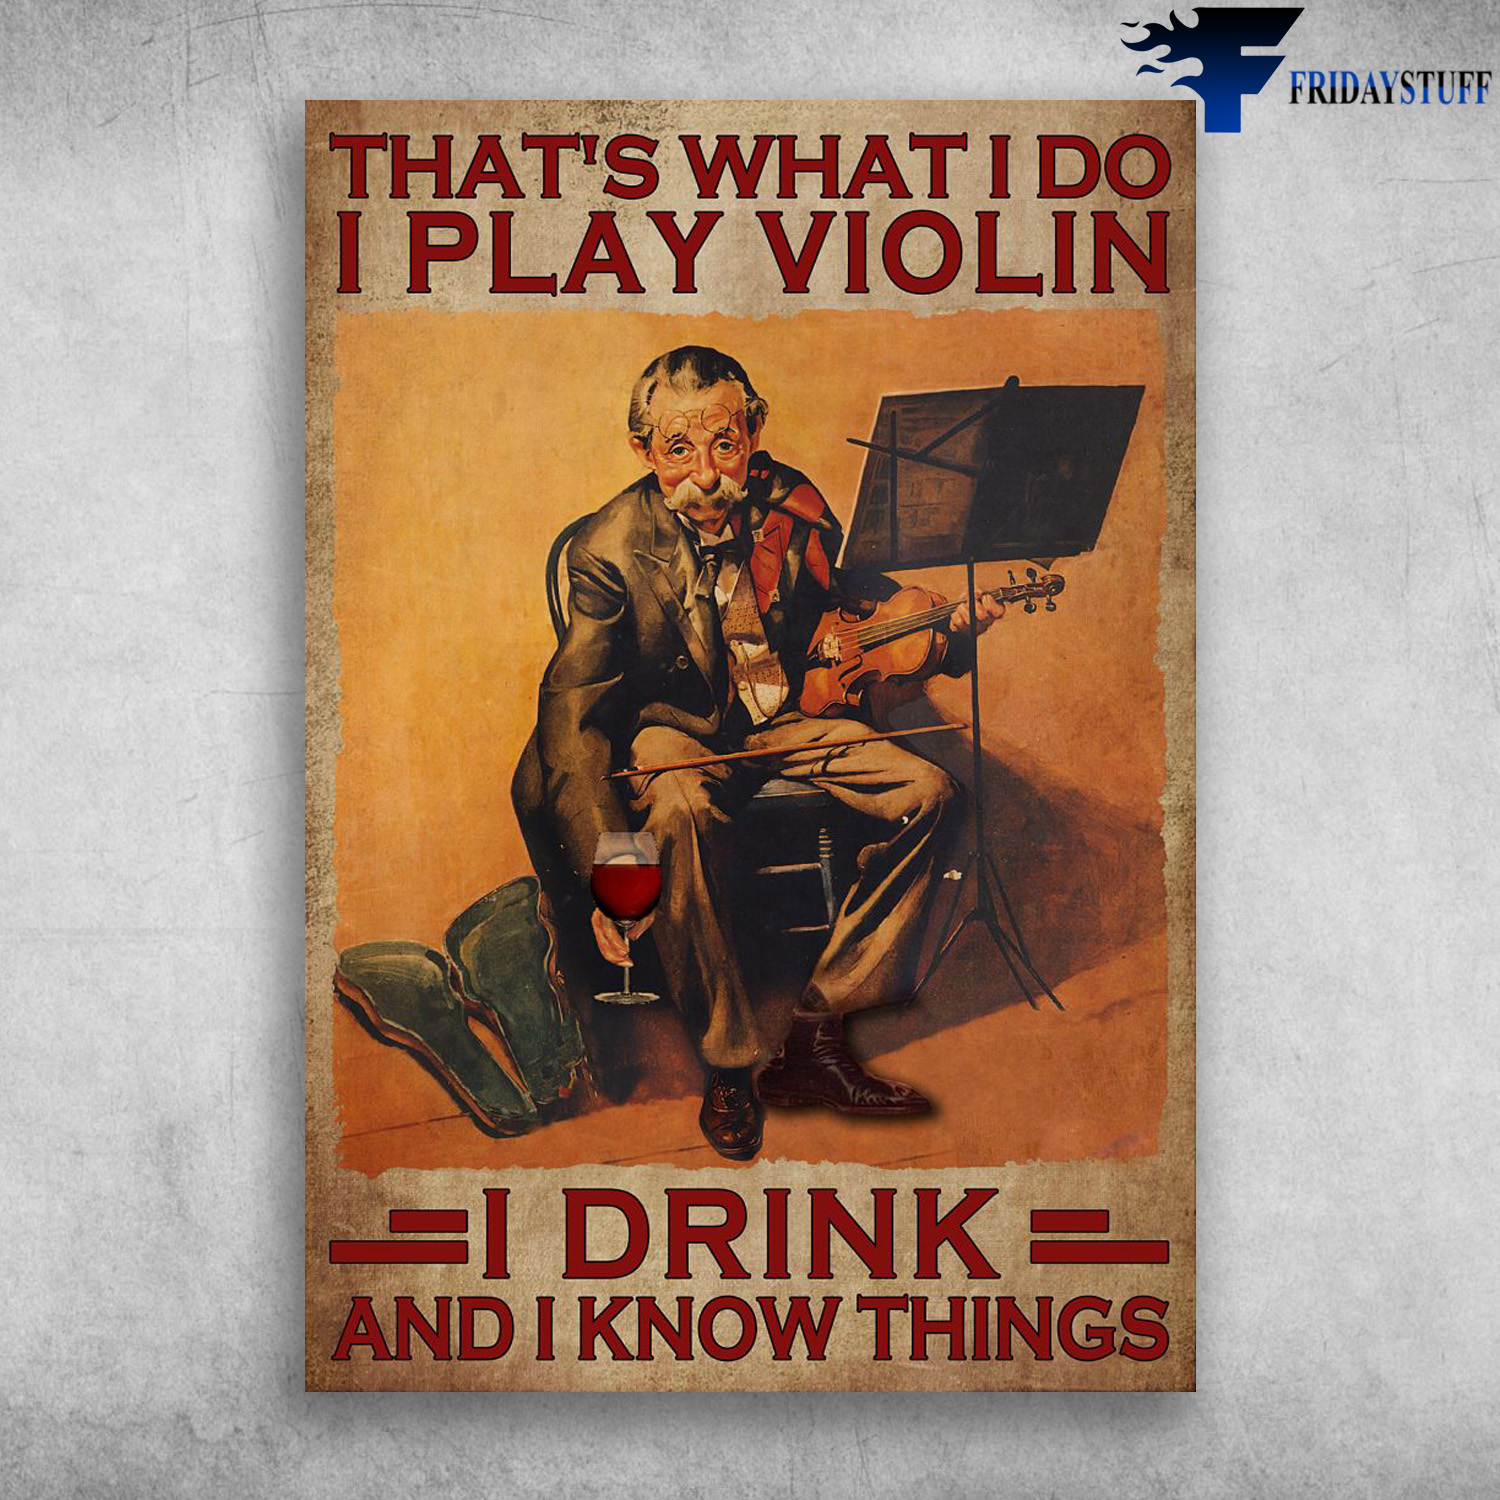 Old Man Play Violin, Wine - That's What I Do, I Play Violin, I Drink, And I Know Things